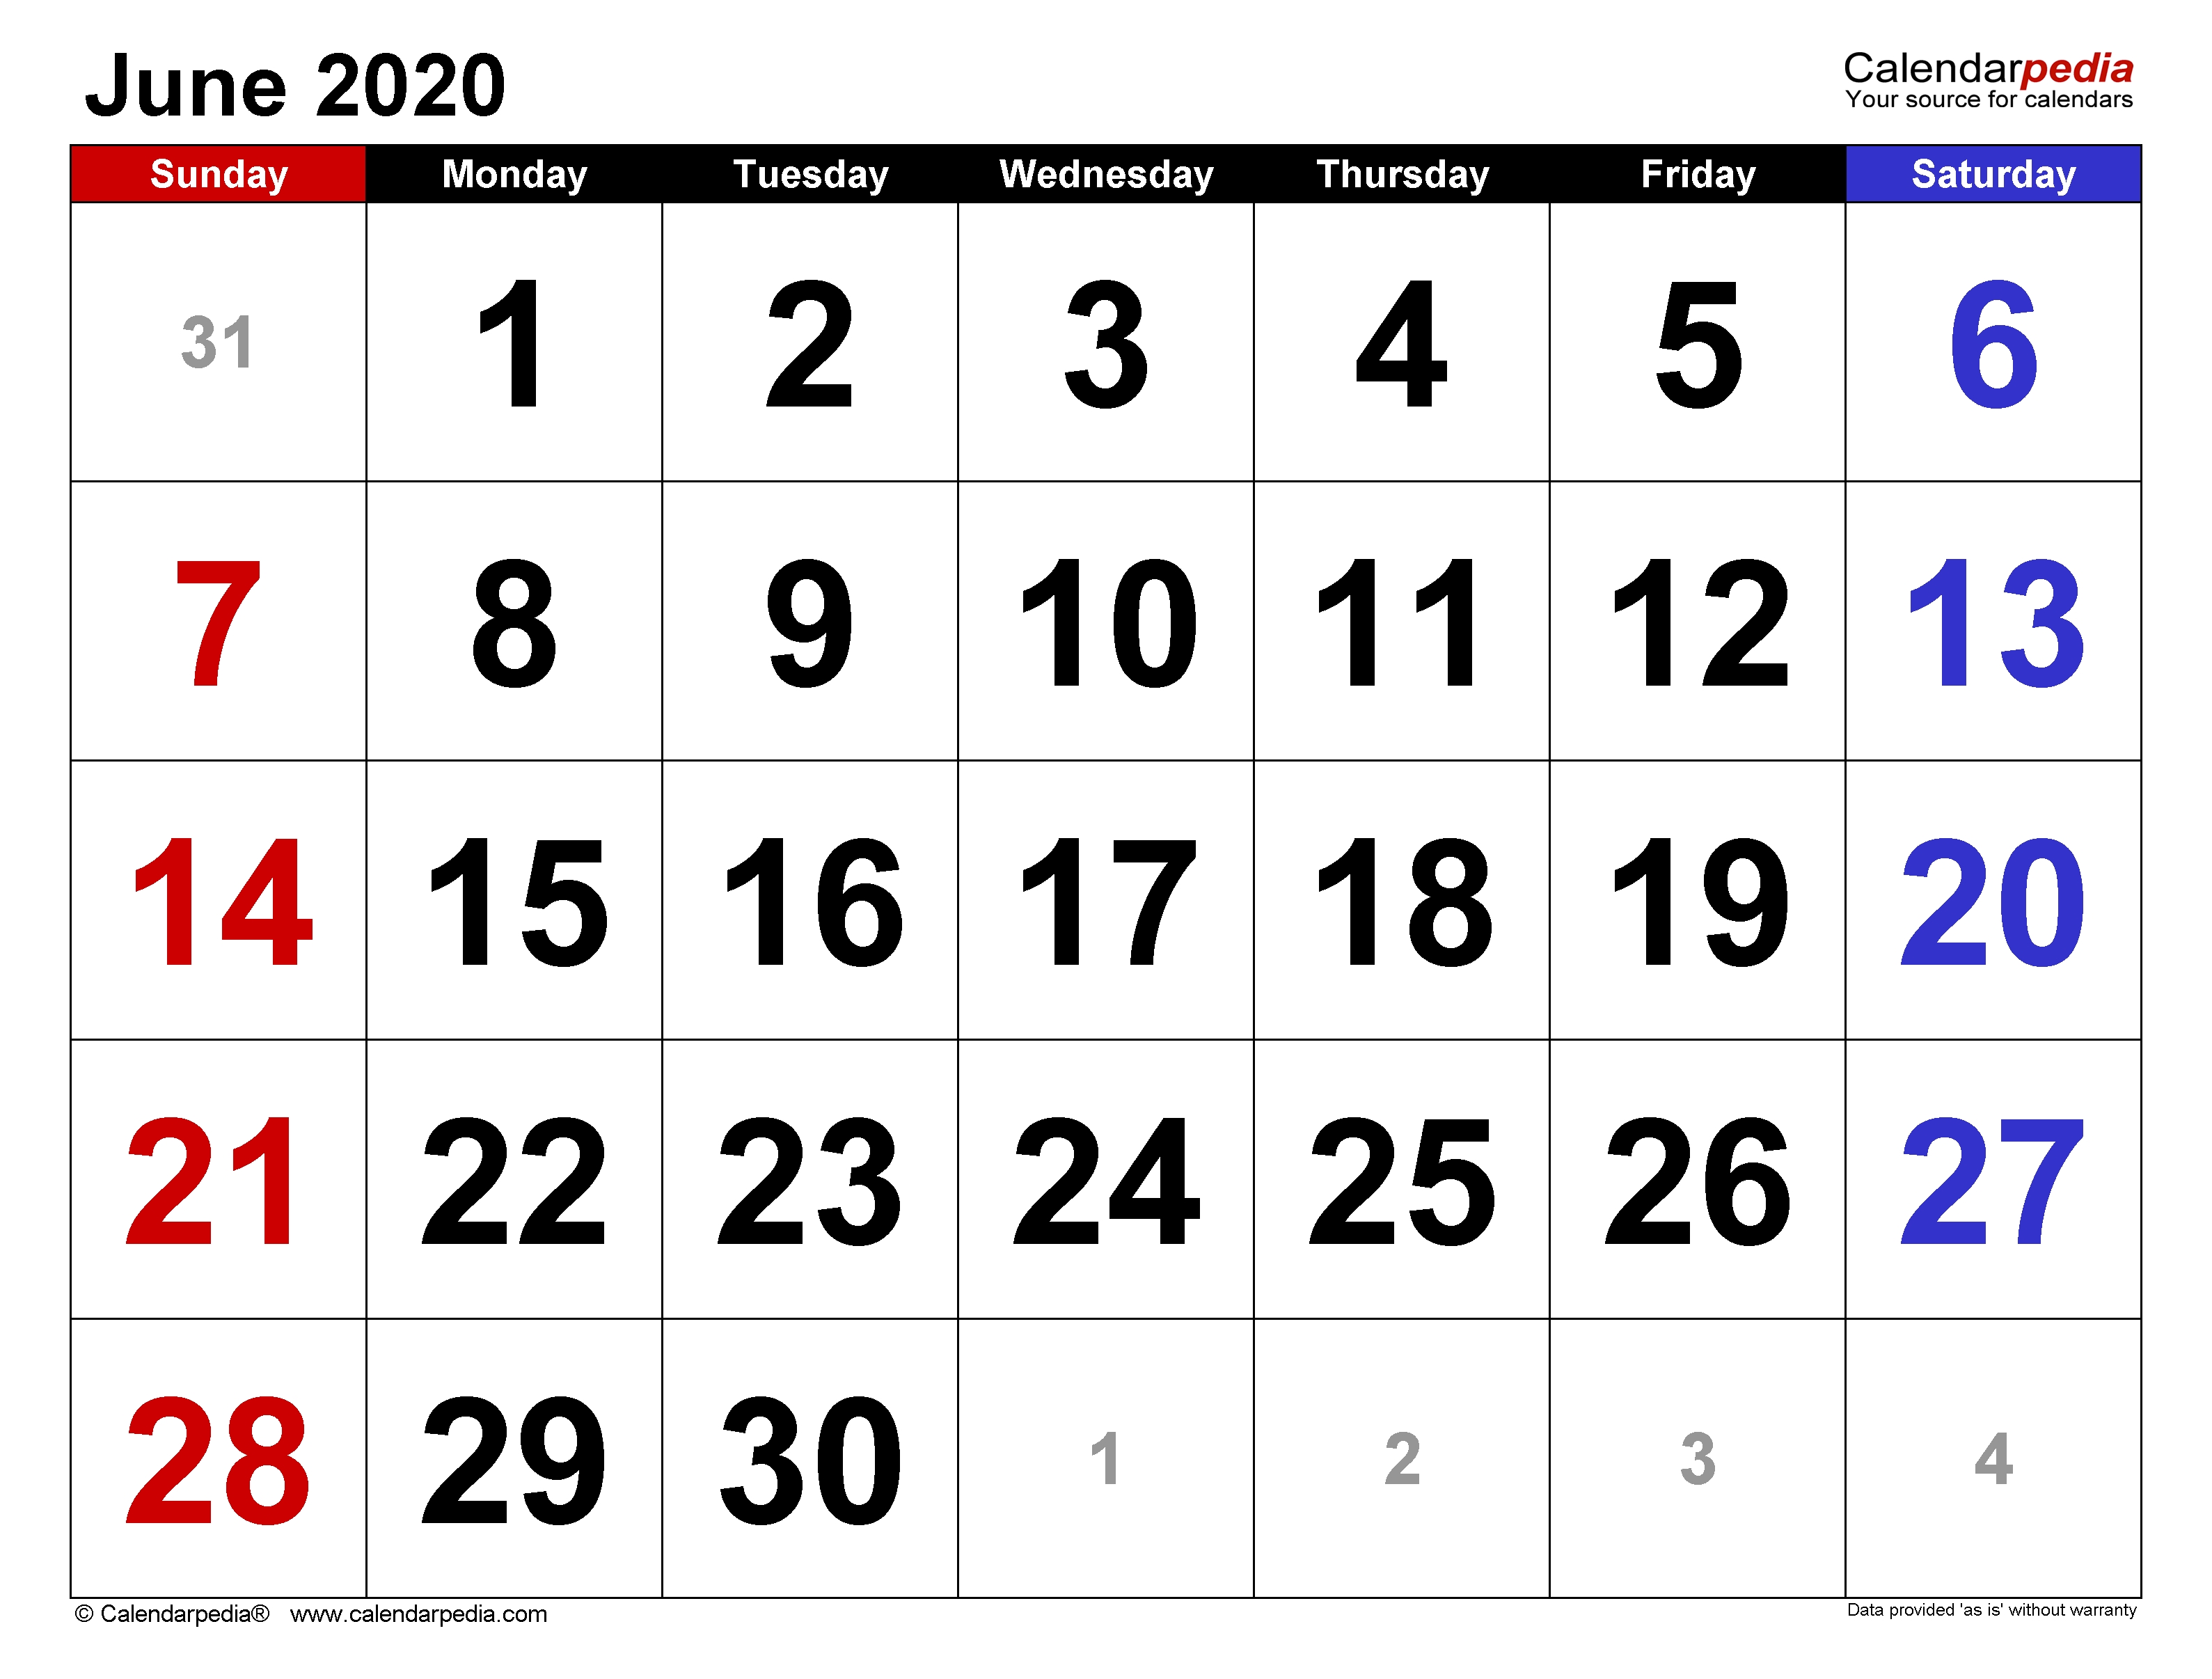 June 2020 - Calendar Templates For Word, Excel And Pdf